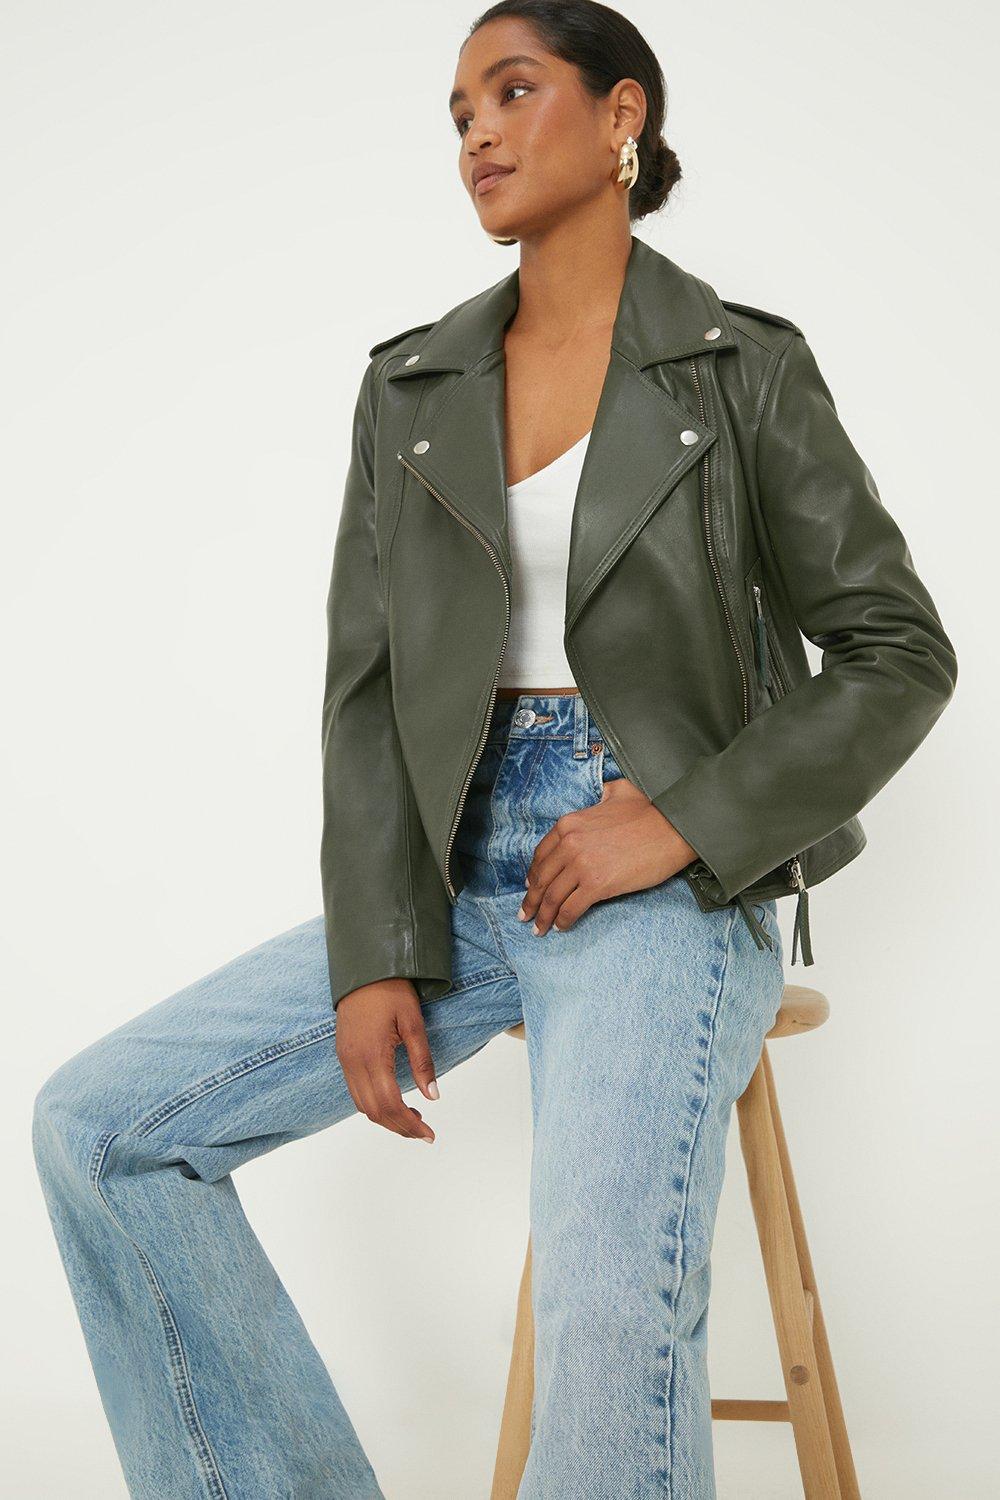 Women’s Boxy Cropped Real Leather Jacket - green - L